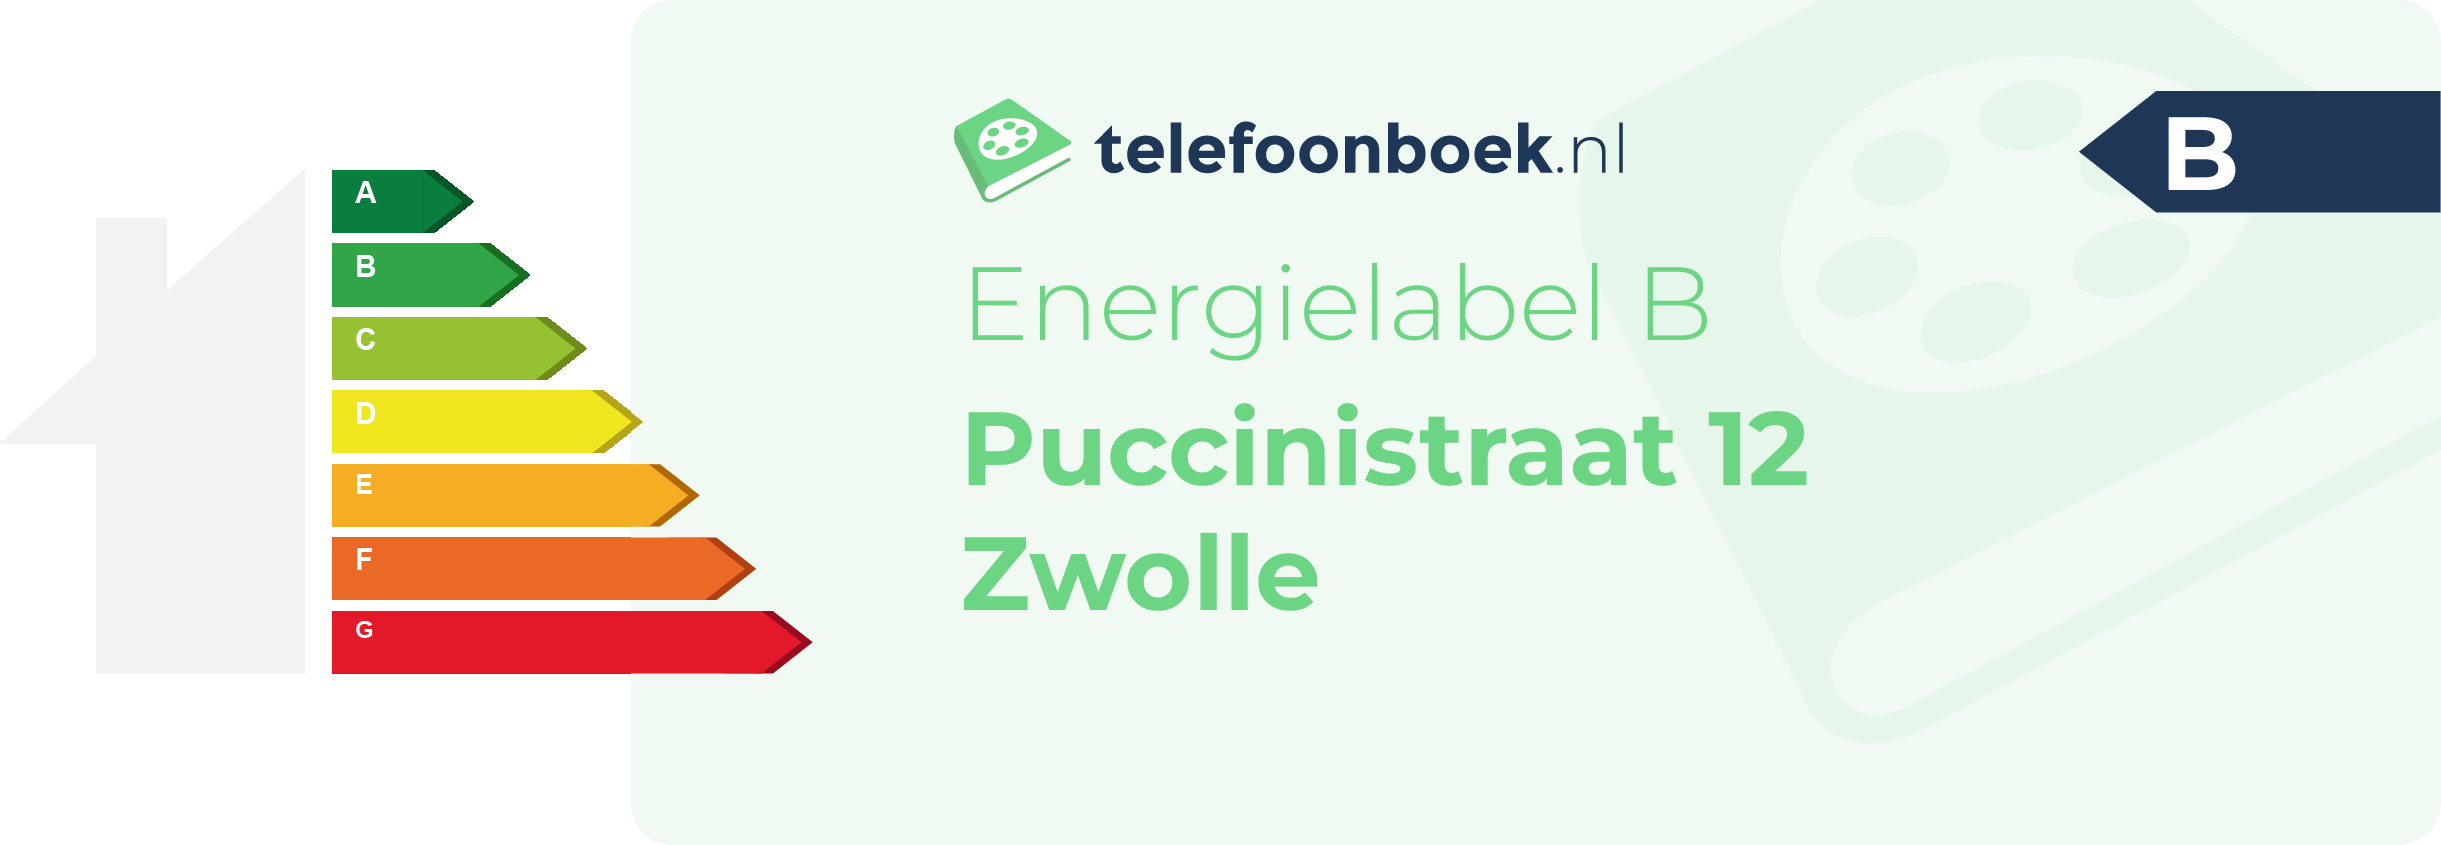 Energielabel Puccinistraat 12 Zwolle